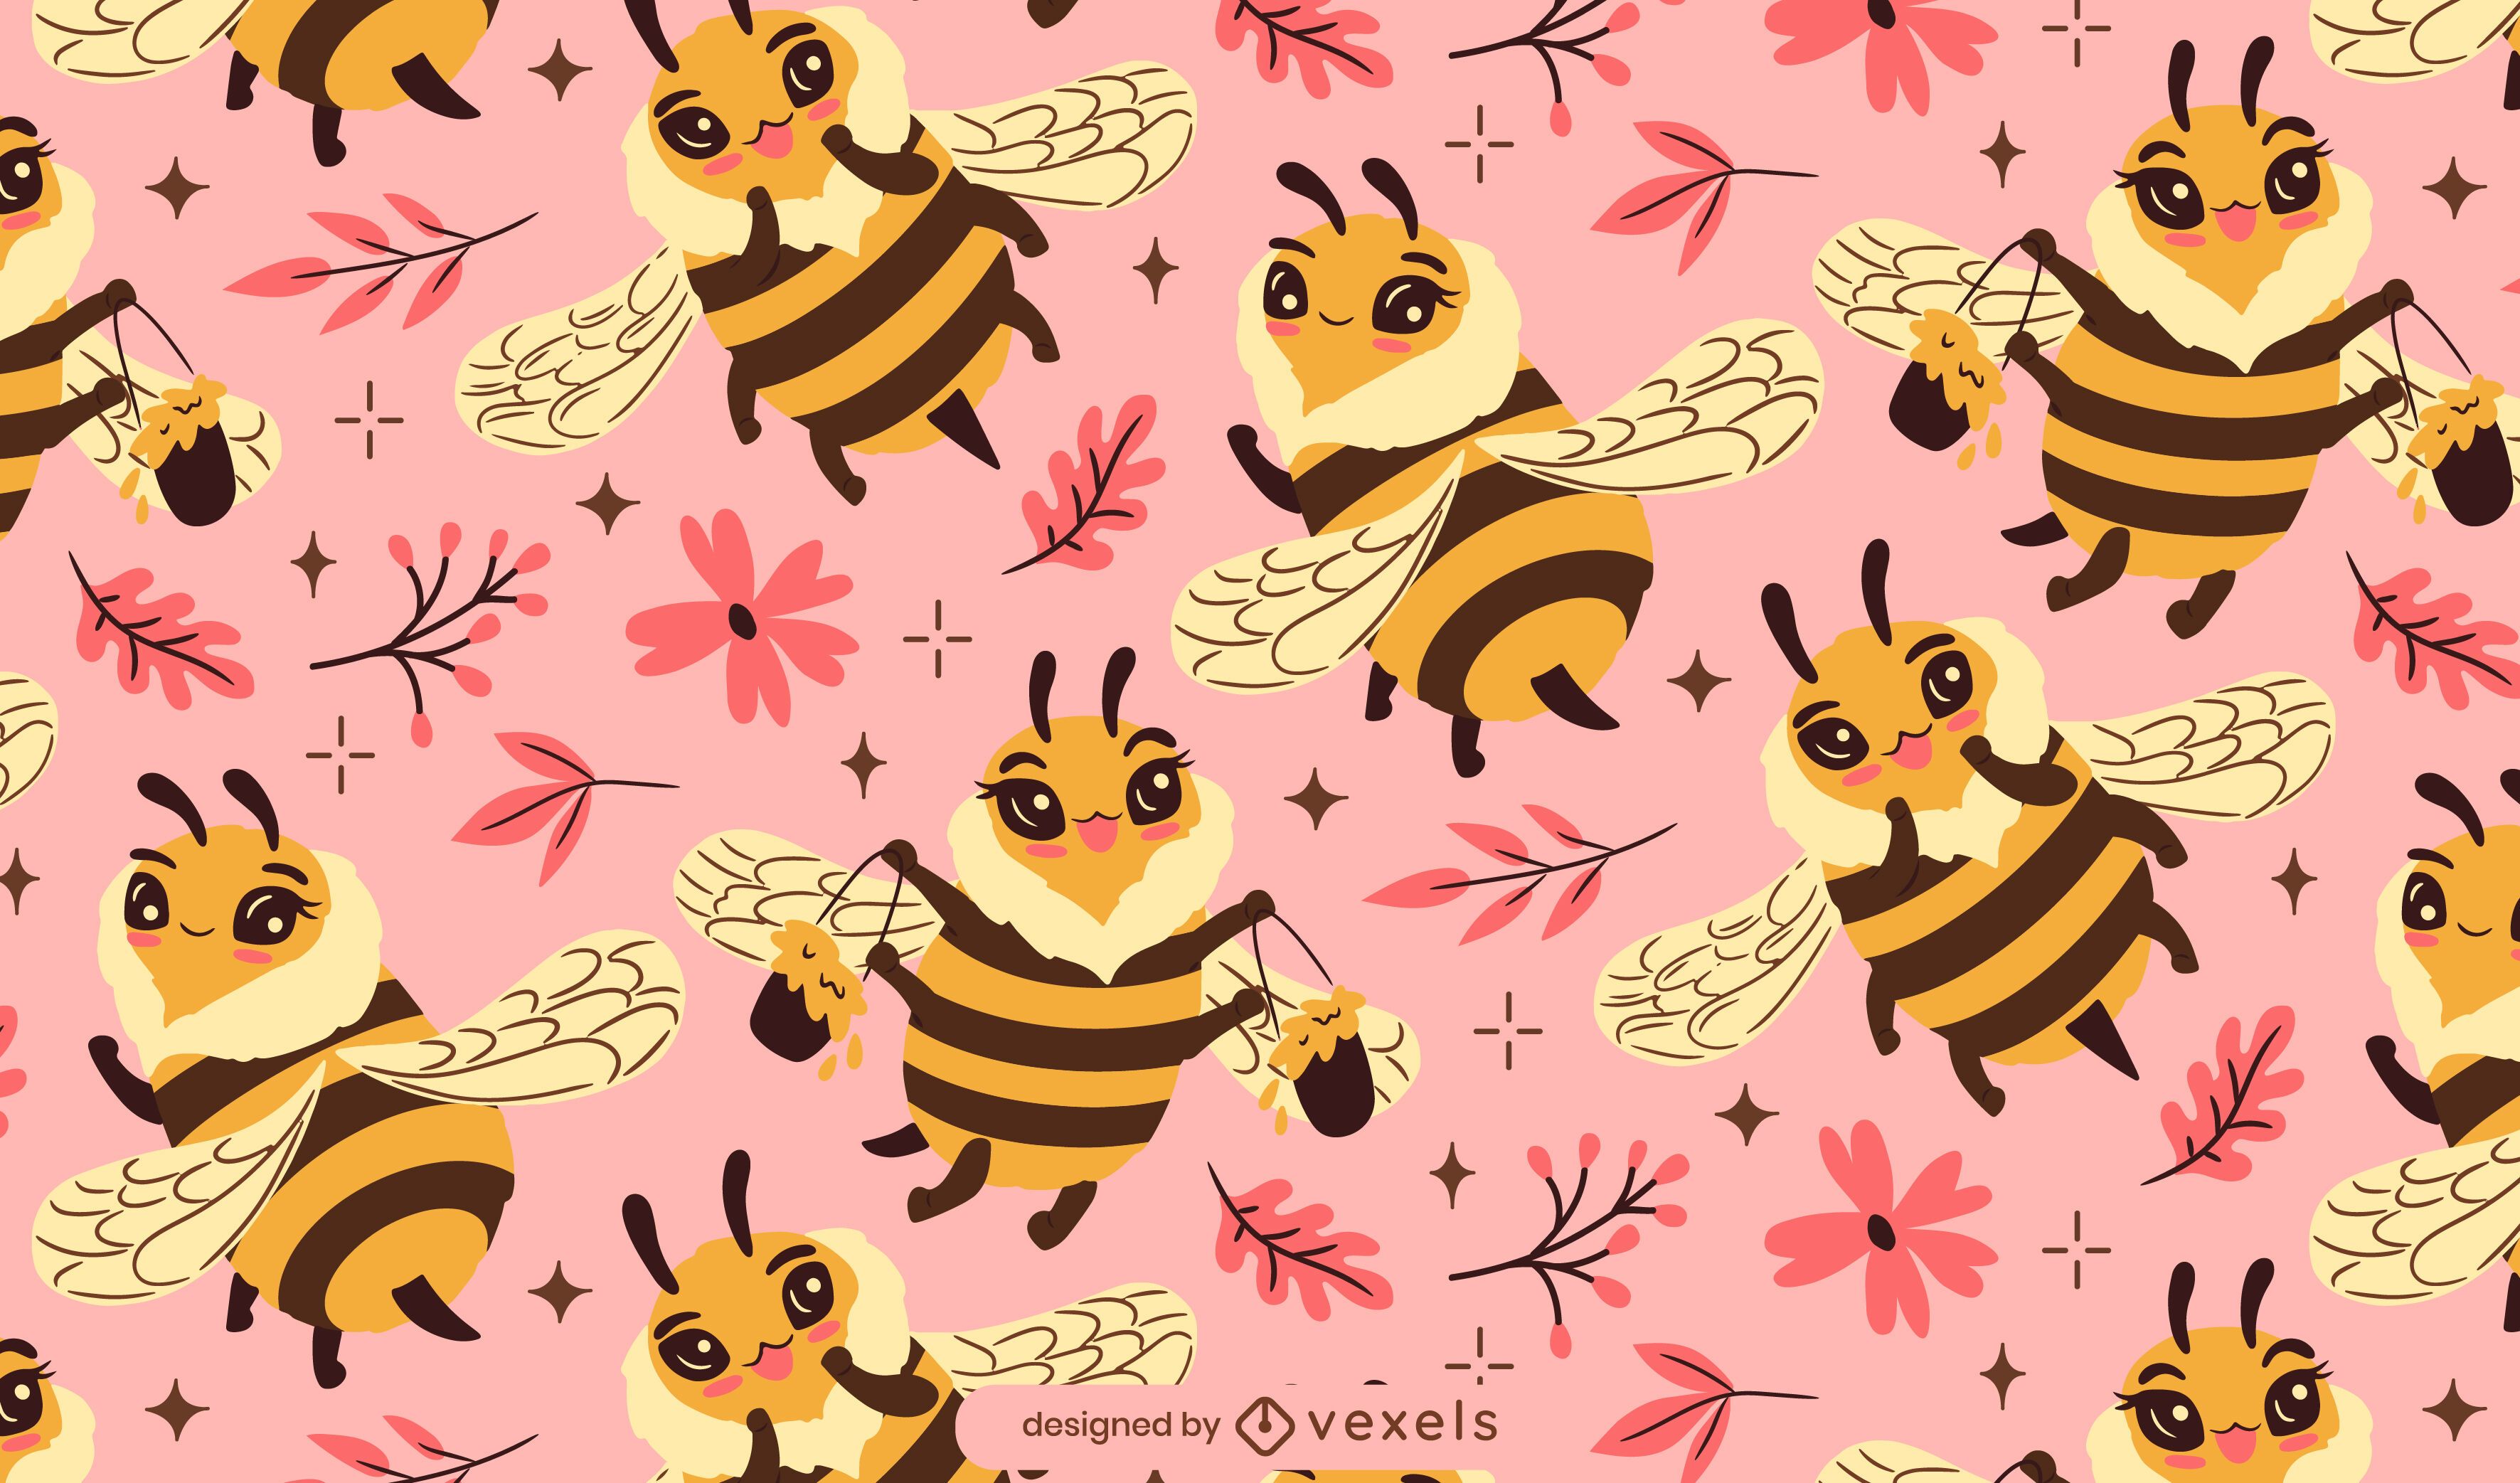 Cute bees with flowers on a pink background - Bee